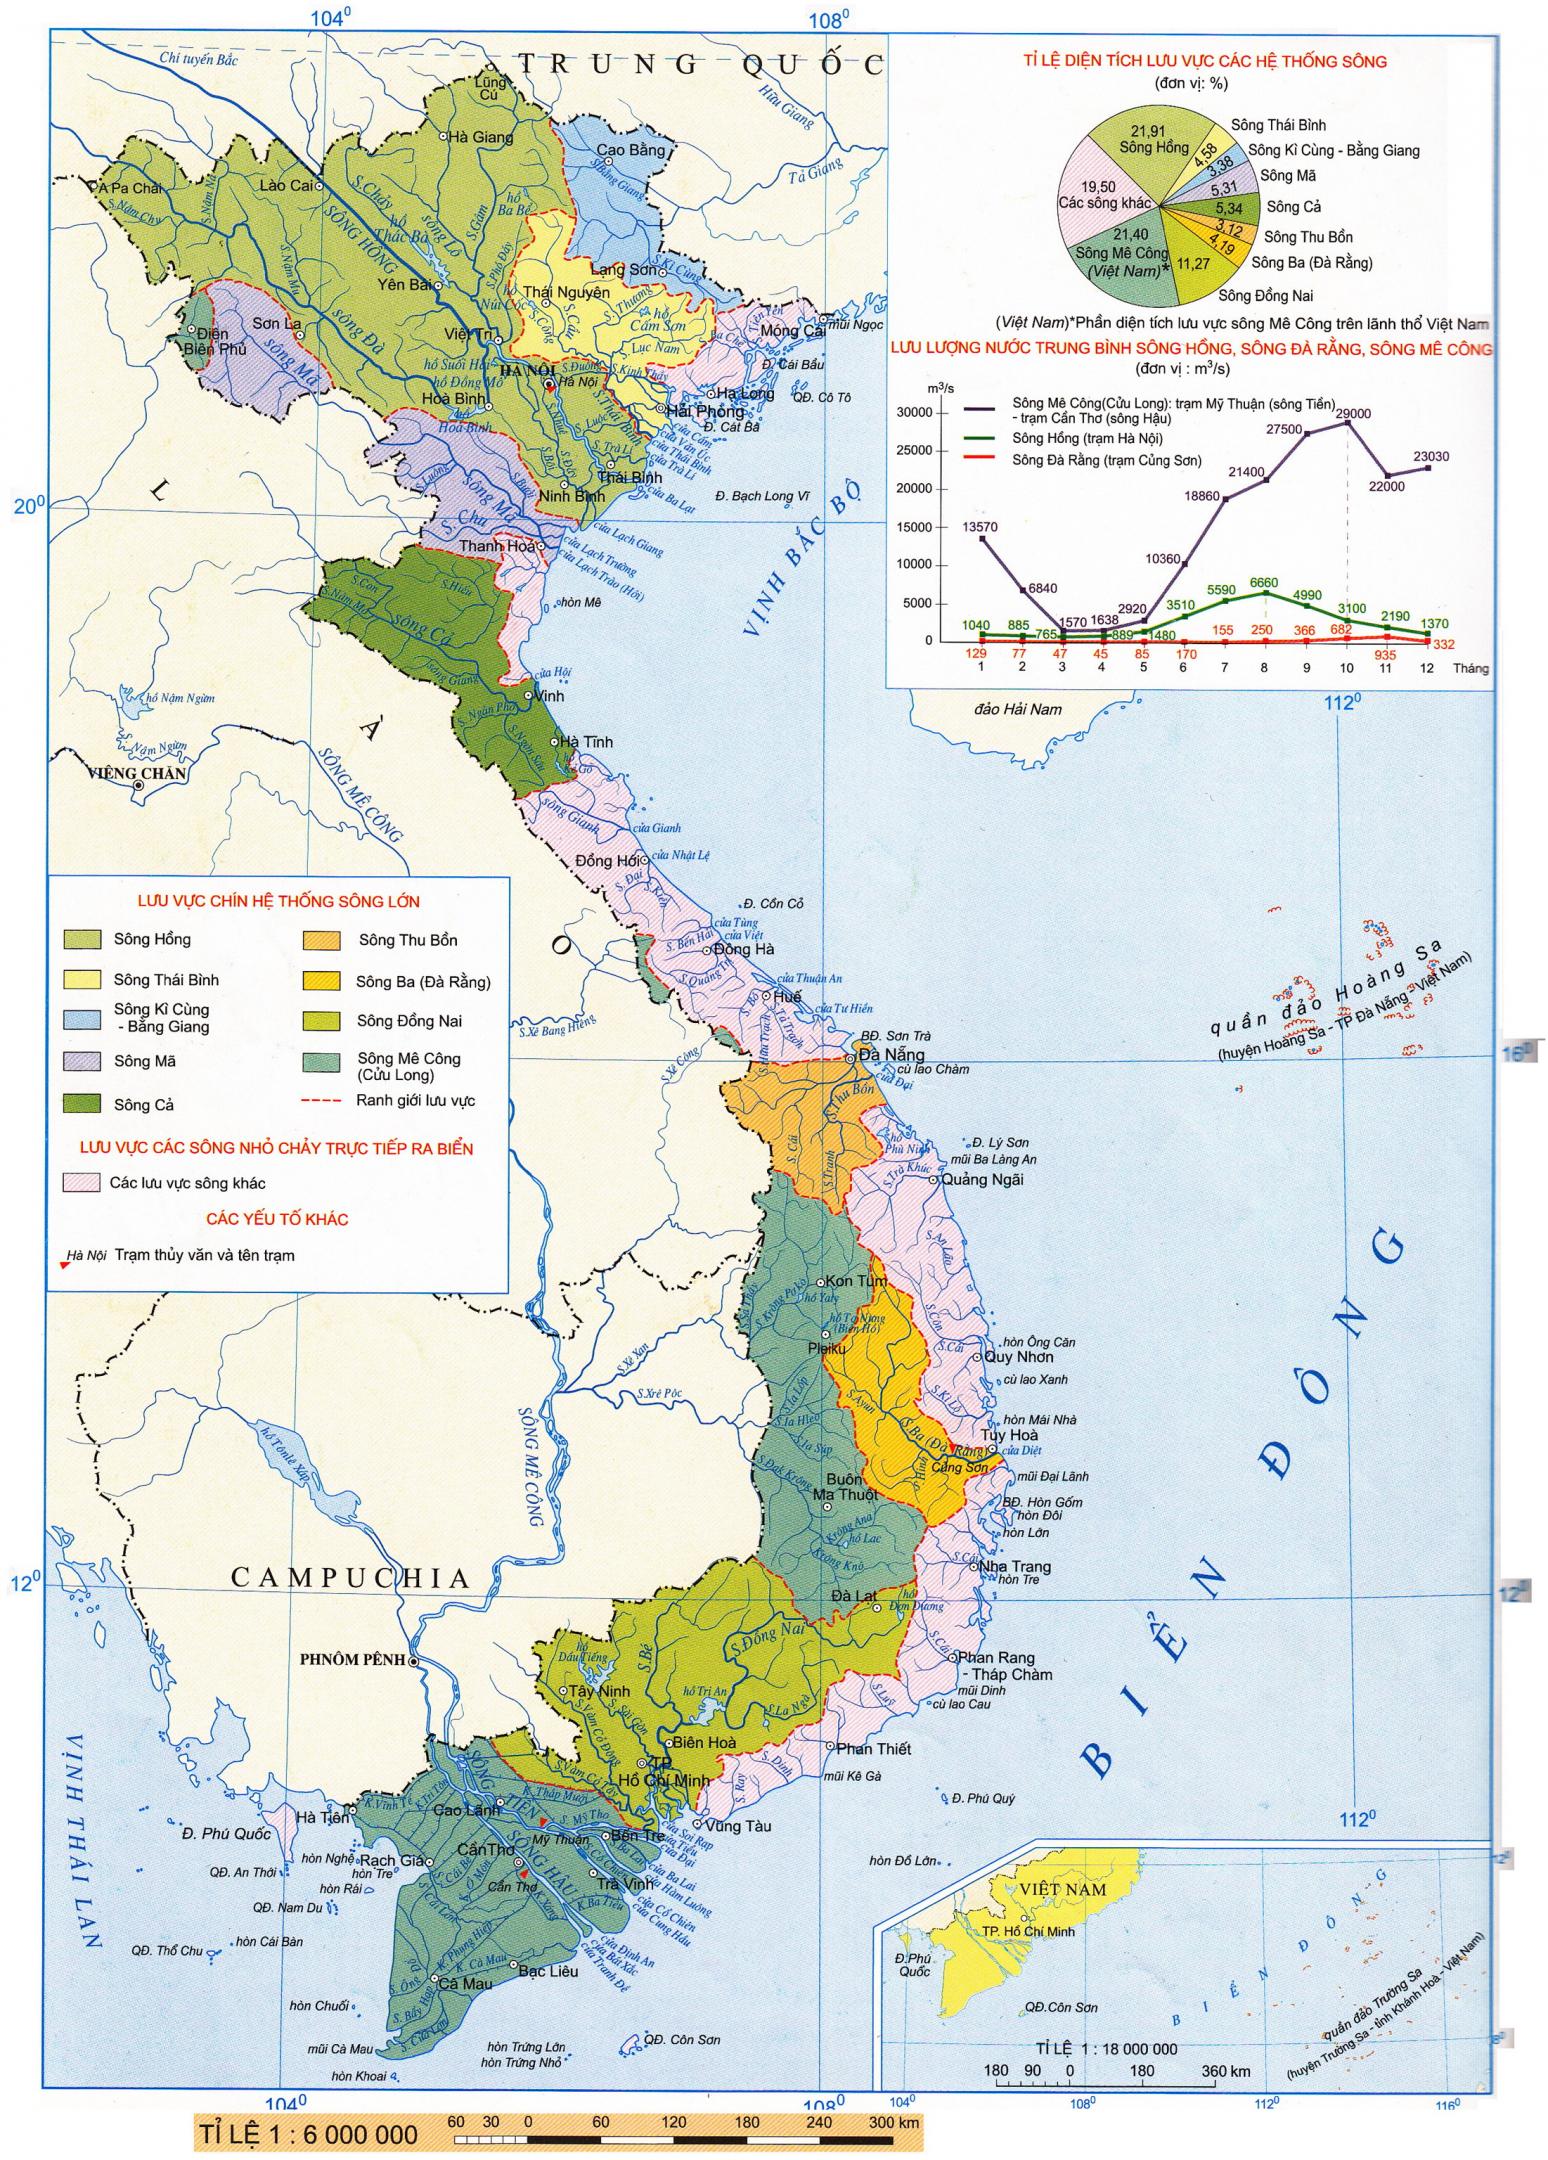 Vietnam River Map - displays the river paths, rivers network in Vietnam